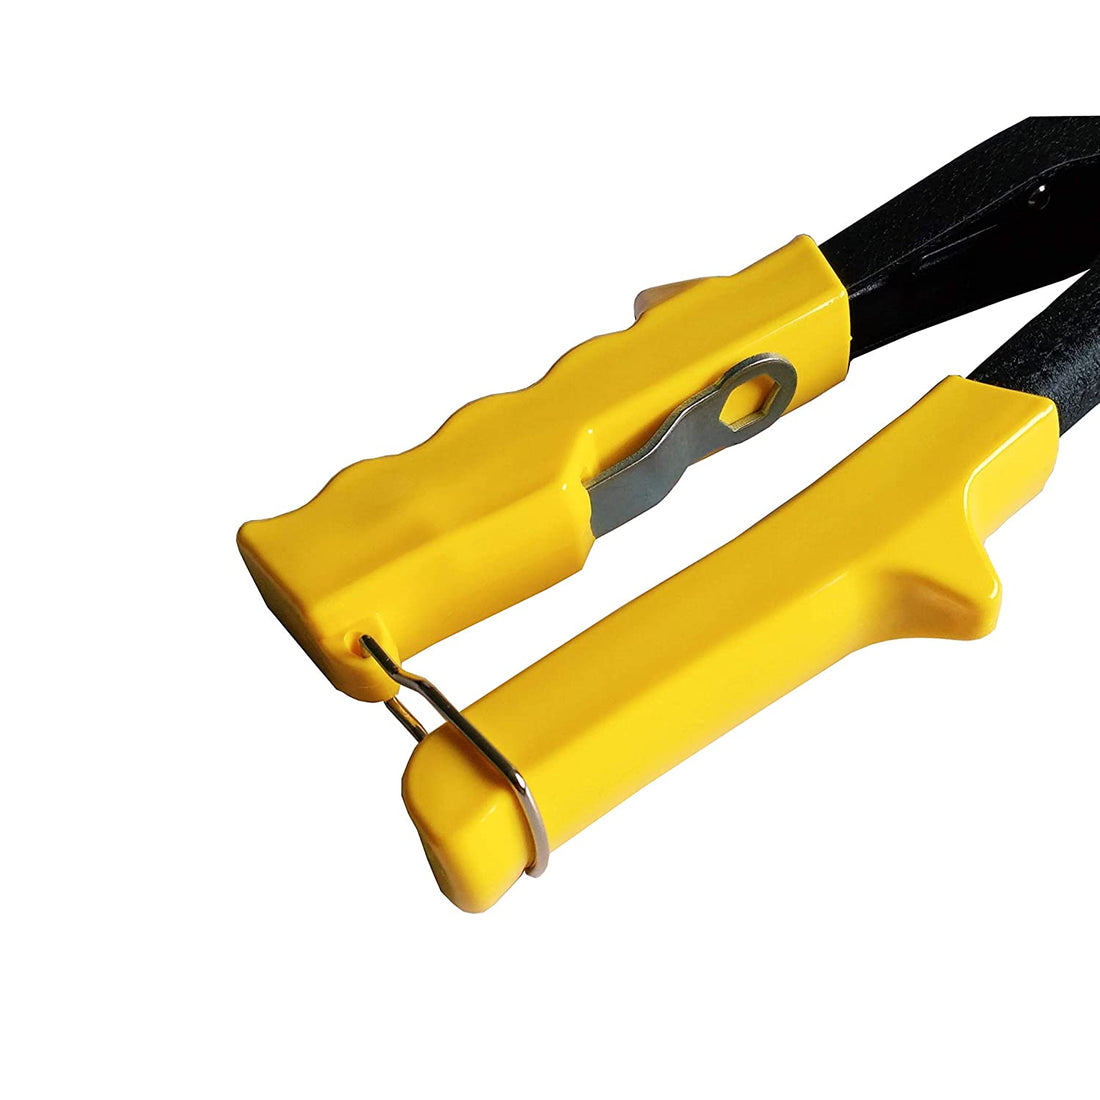 TOMAHAWK Hand Riveter - Medium Duty. This comfortable, easy-to-squeeze TOMAHAWK® Hand Riveter has a long handle and can be used in tight spaces. It has a durable steel construction and is ideal for many types of maintenance and repair jobs.